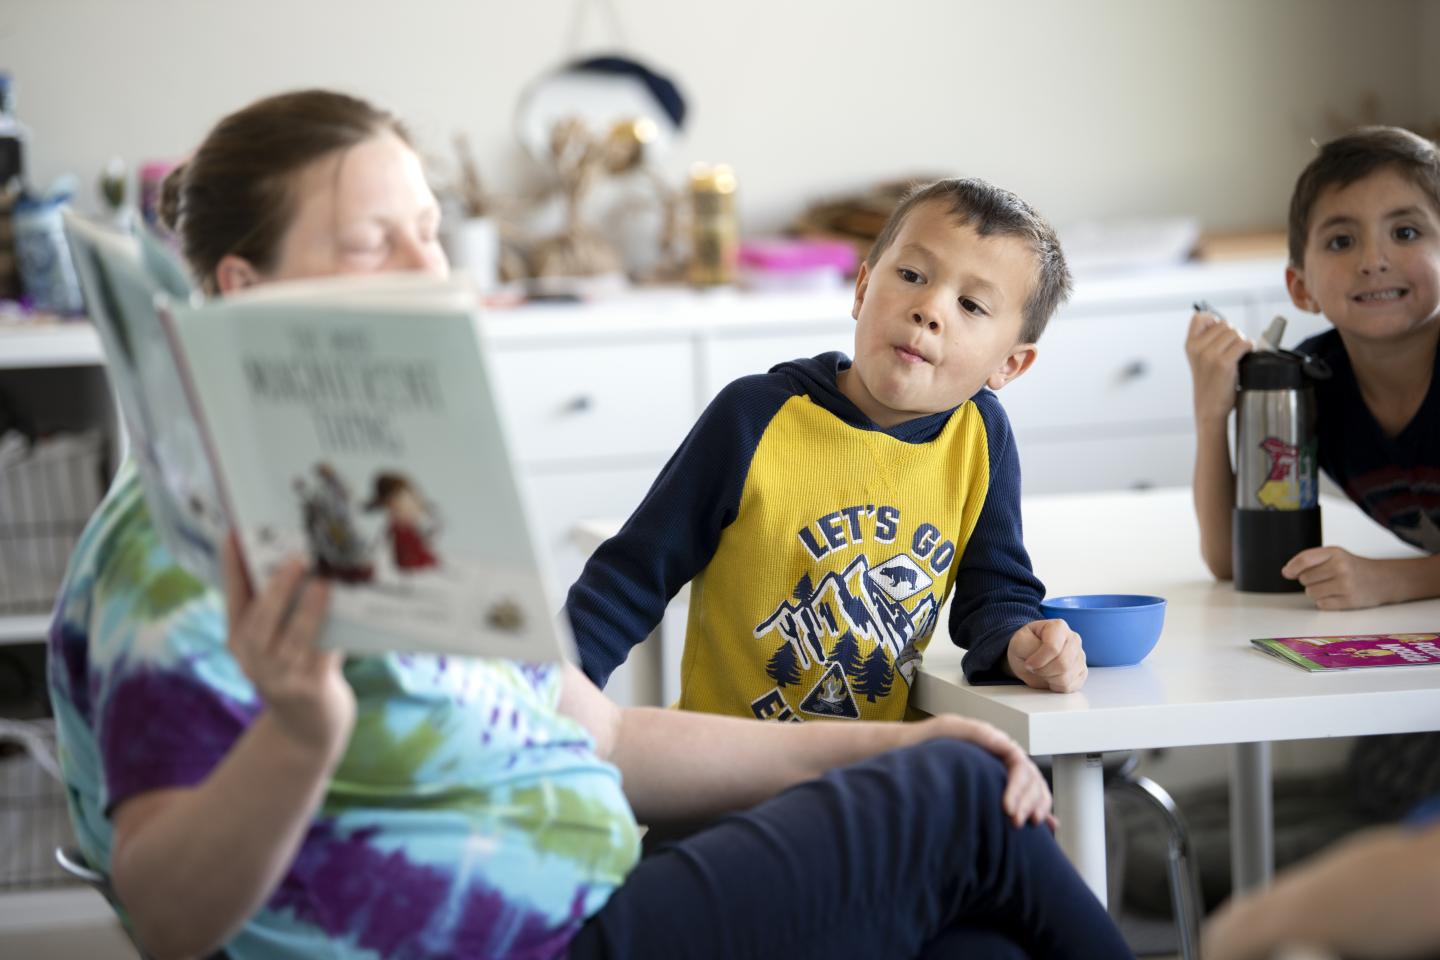 Two young boys attentively listen as a woman reads from a book titled 'The Night Before Kindergarten' in a classroom setting.